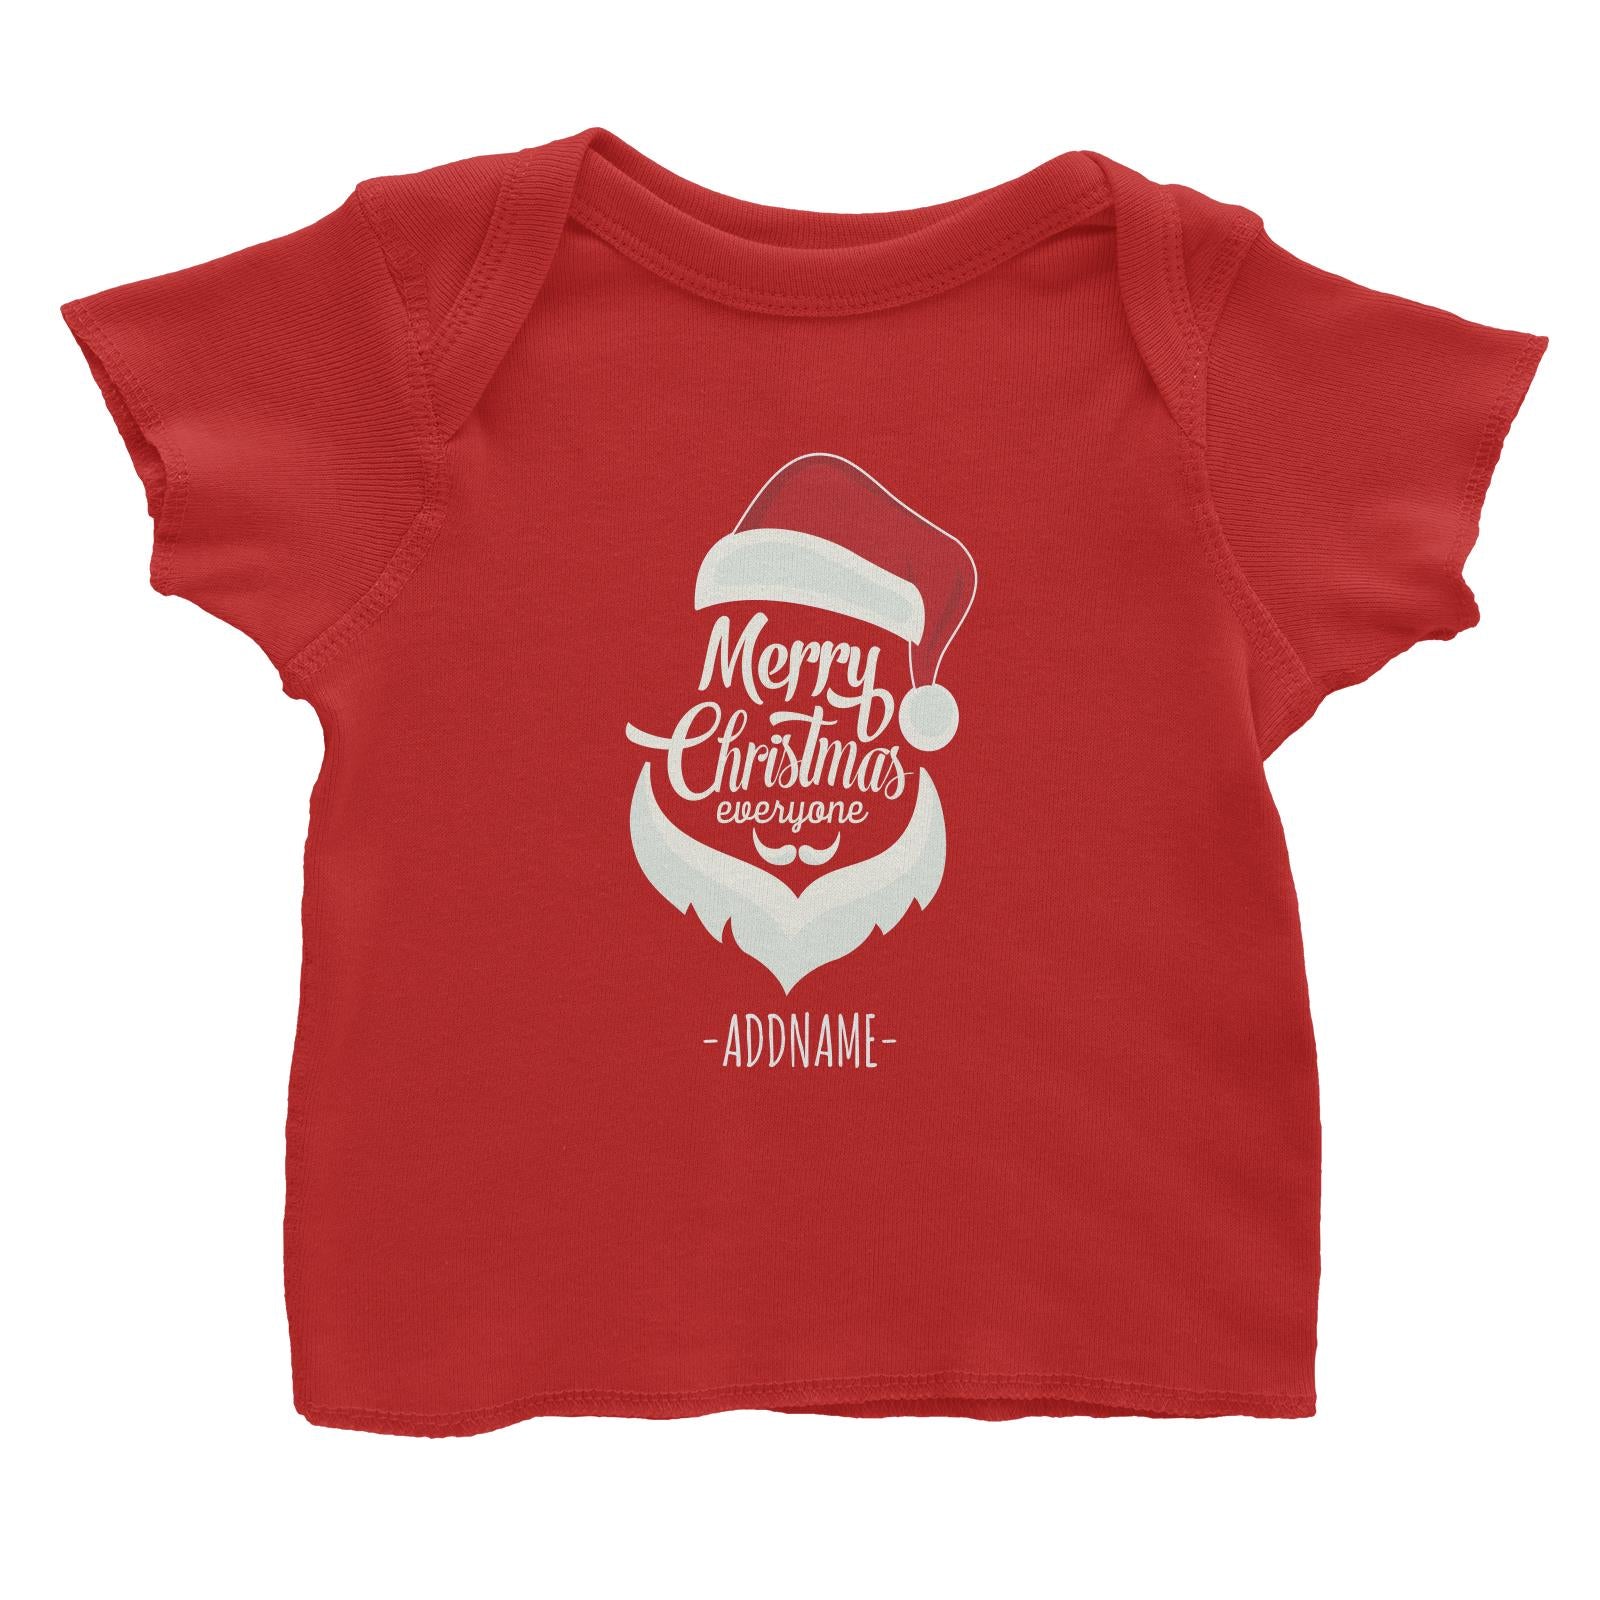 Merry Christmas Everyone with Santa Hat and Beard Addname Baby T-Shirt  Matching Family Personalizable Designs